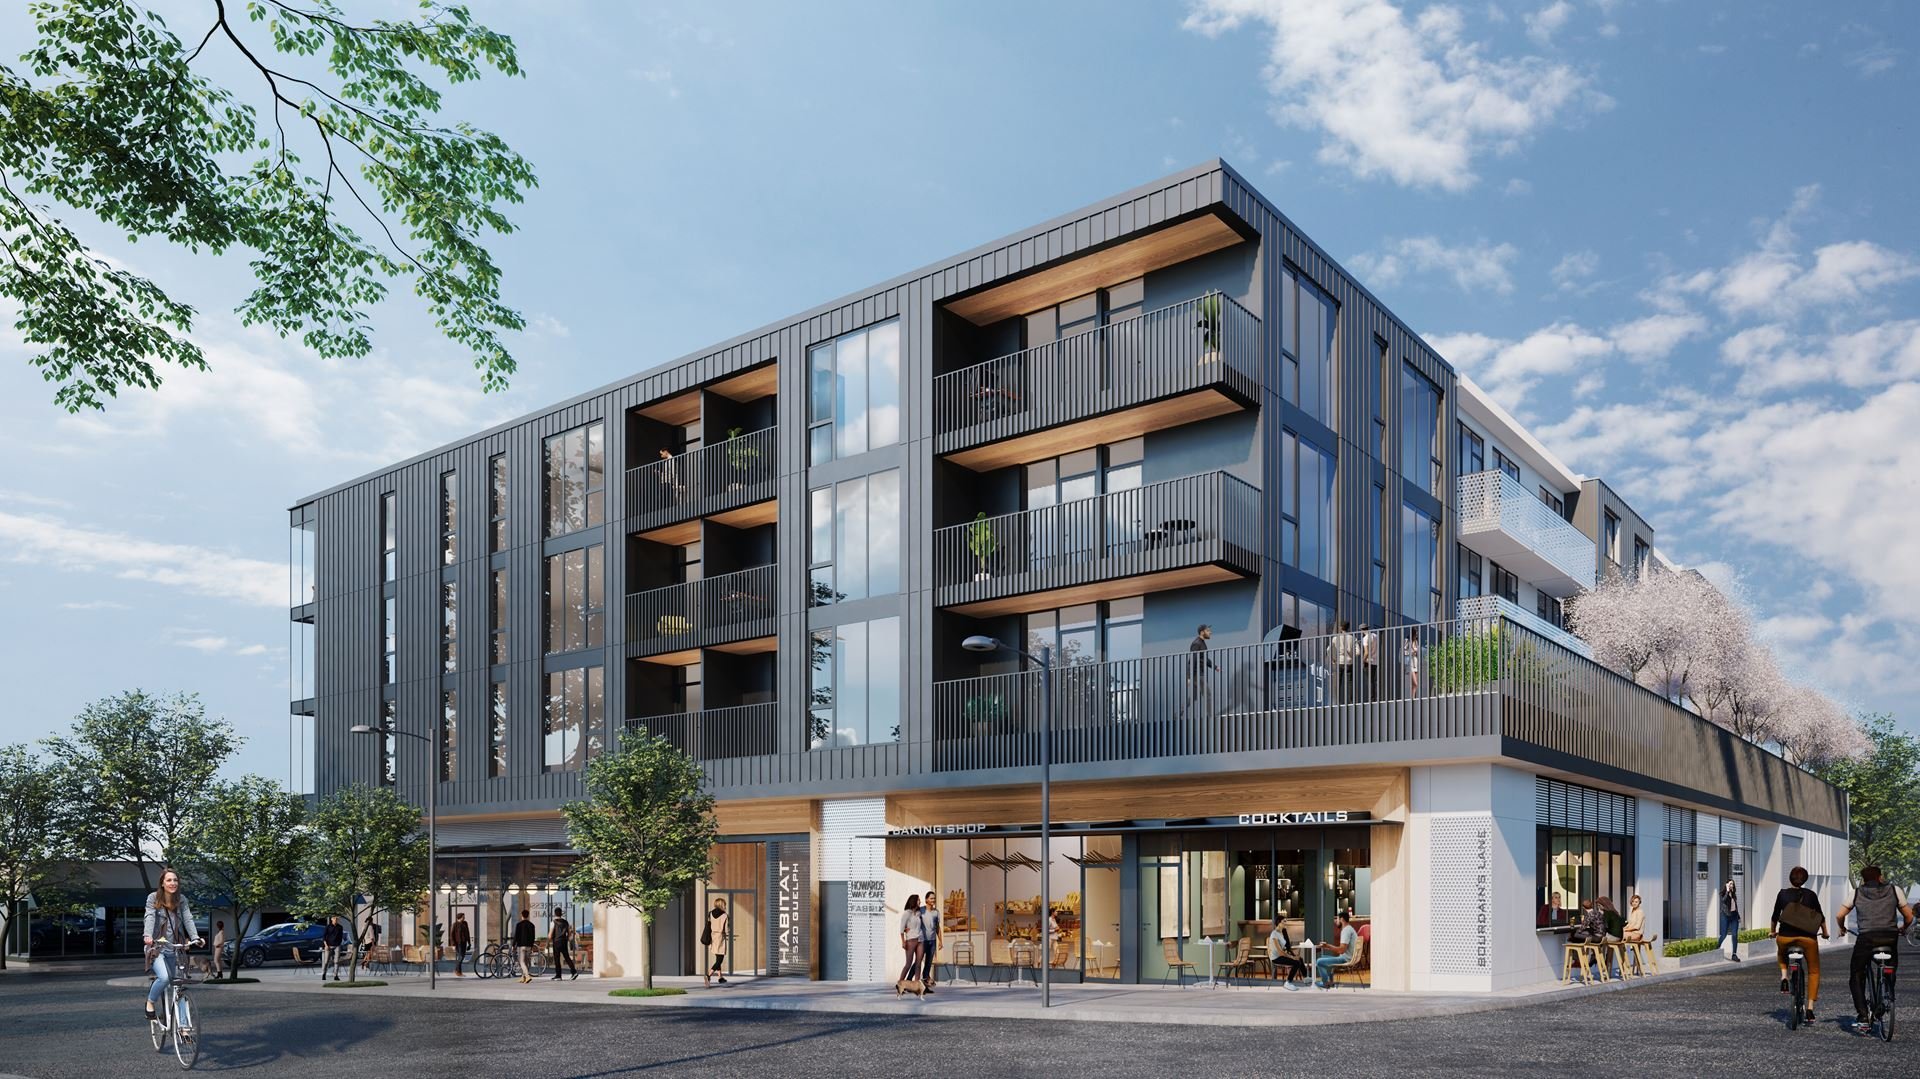 Habitat - 2520 Guelph St - Development by Porte Communities , Fabric Living and Hudson Projects!